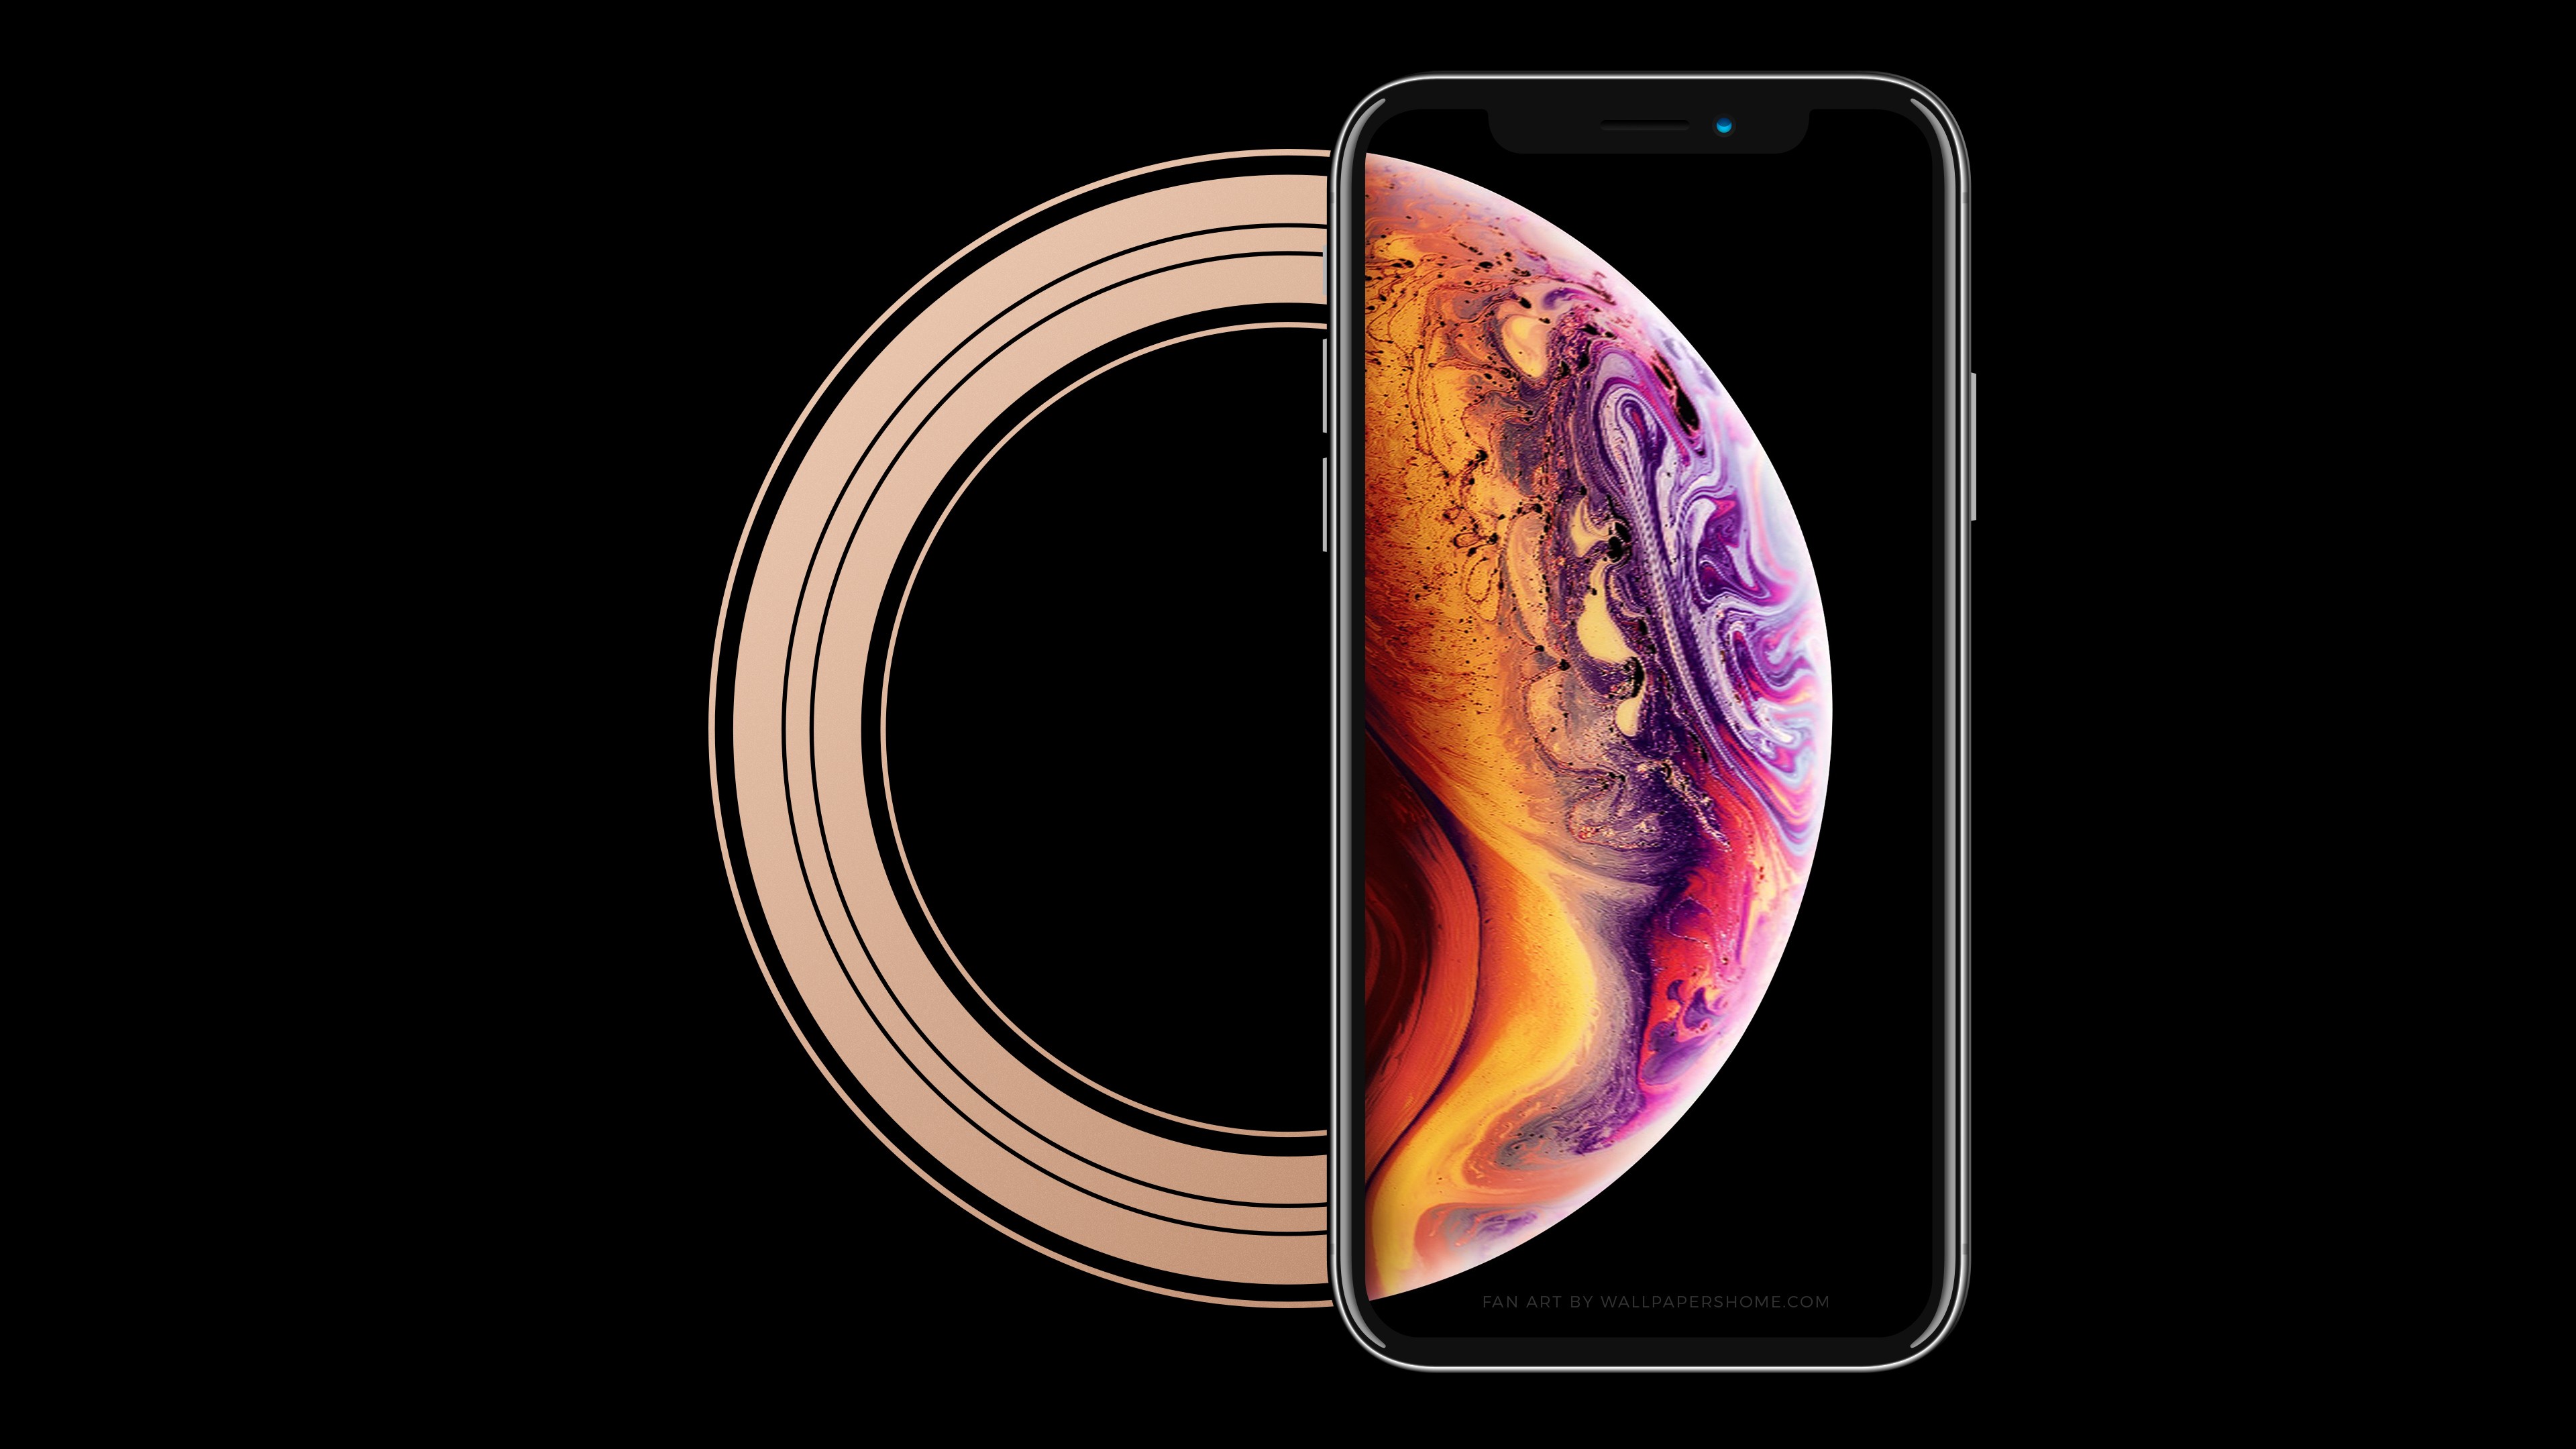 Wallpaper For Iphone Xs Max K Tons Of Awesome Iphone Xs K Wallpapers